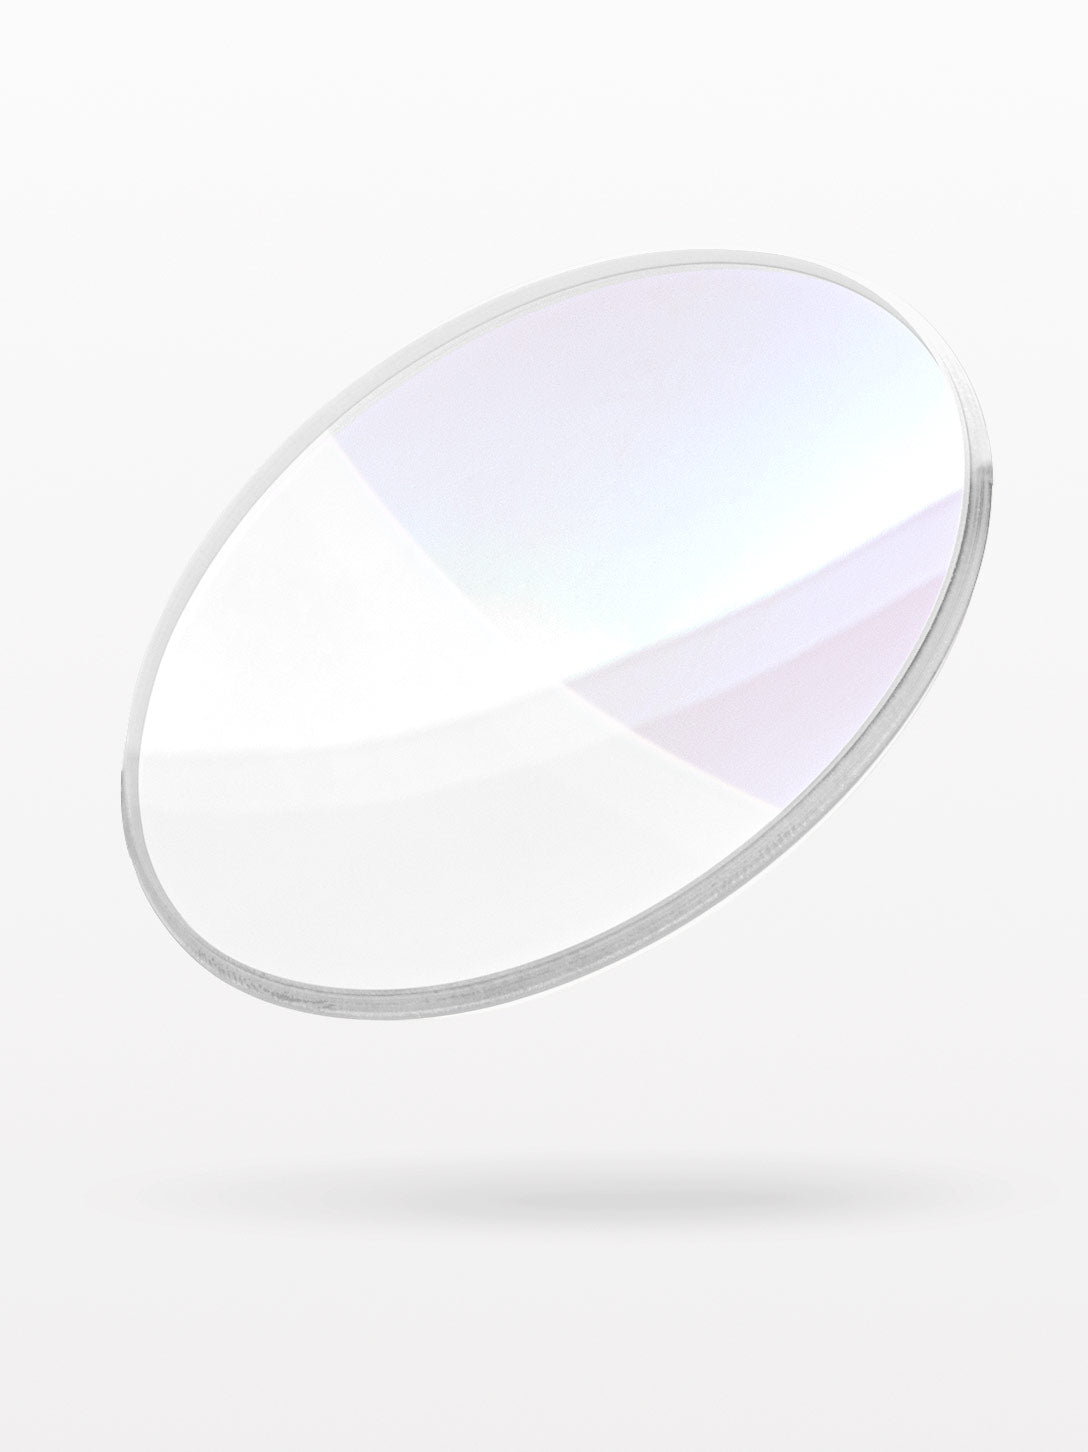 Clear lens with premium coatings applied